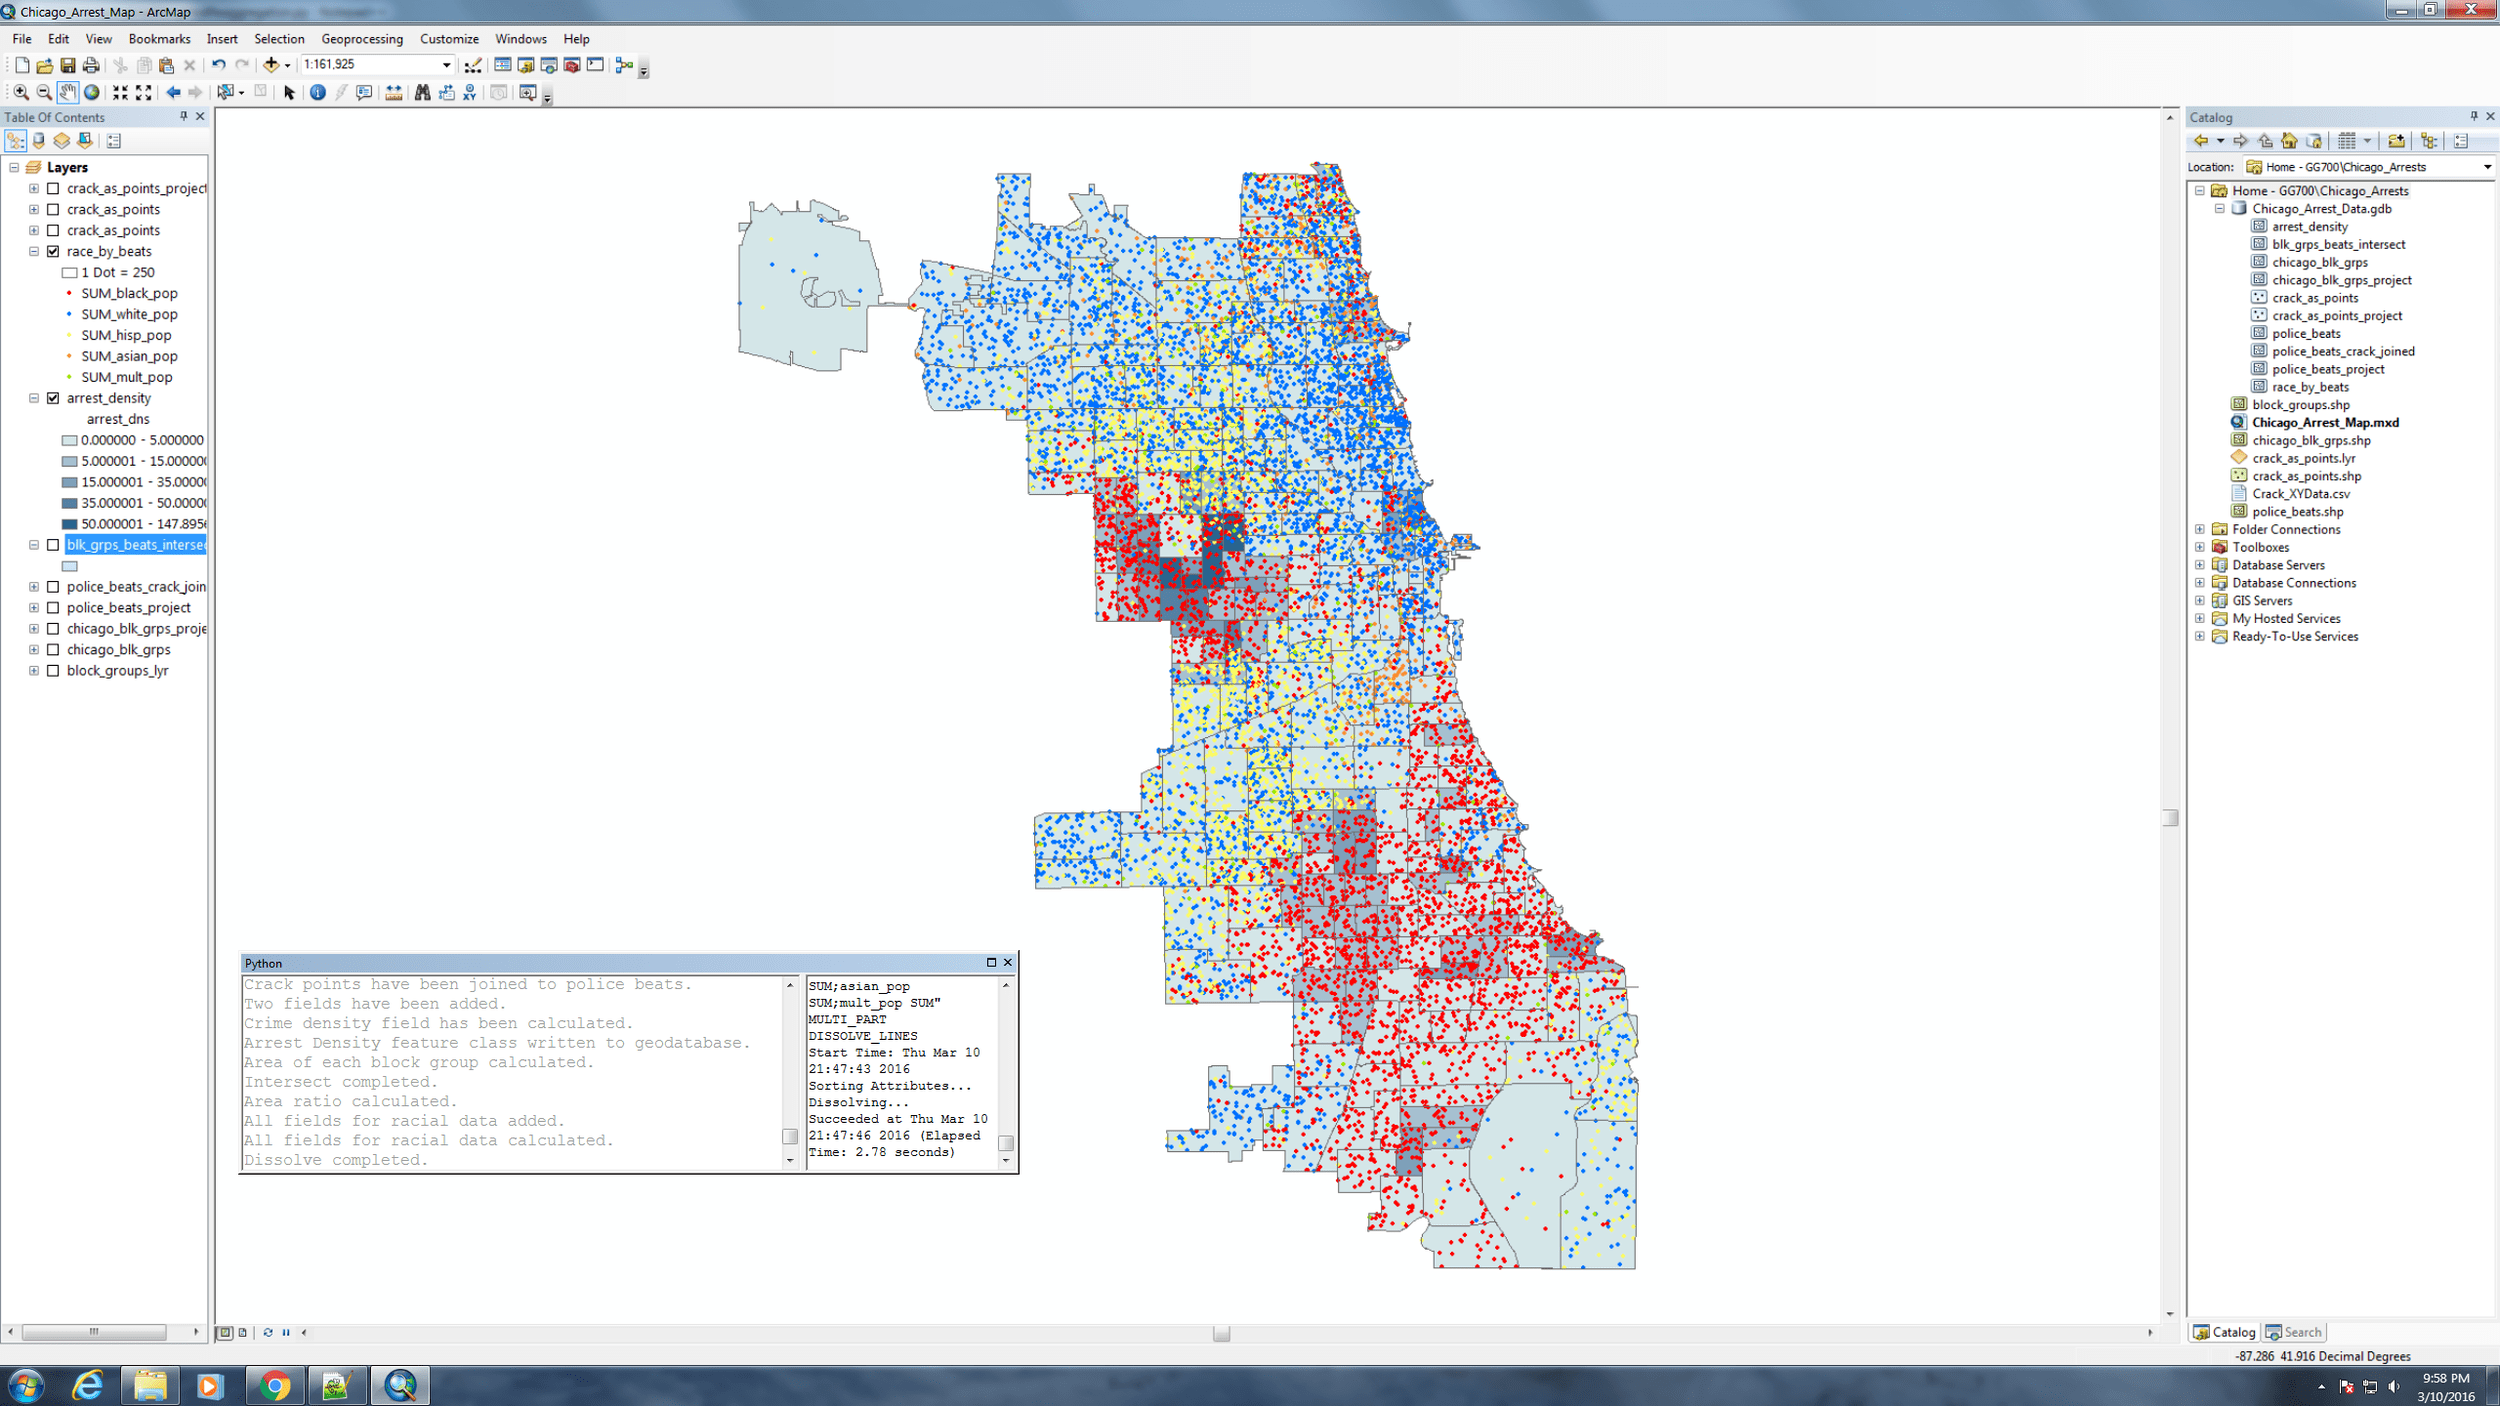 The map produced by running my custom geoprocessing script for examining the spatial correlations between non-violent drug arrests and race in Chicago.